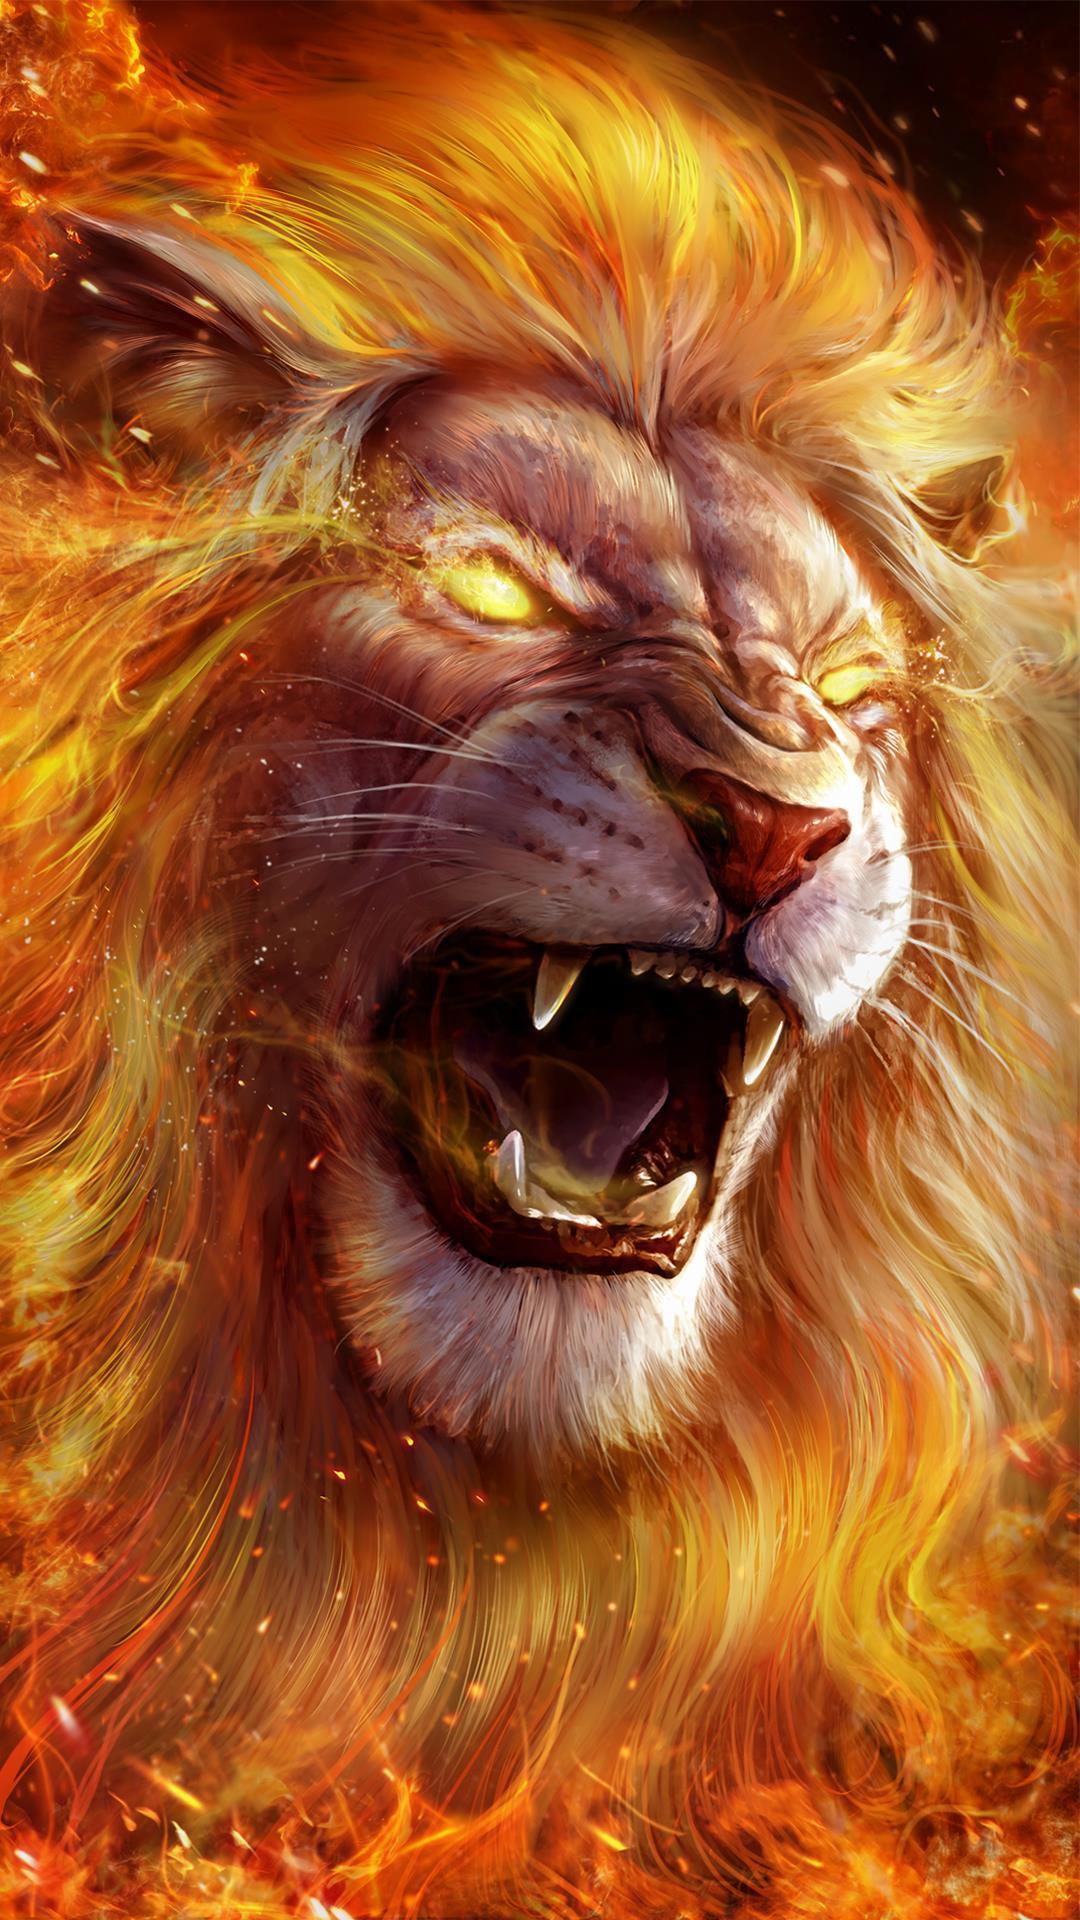 Roaring Lion Live Wallpaper for Android